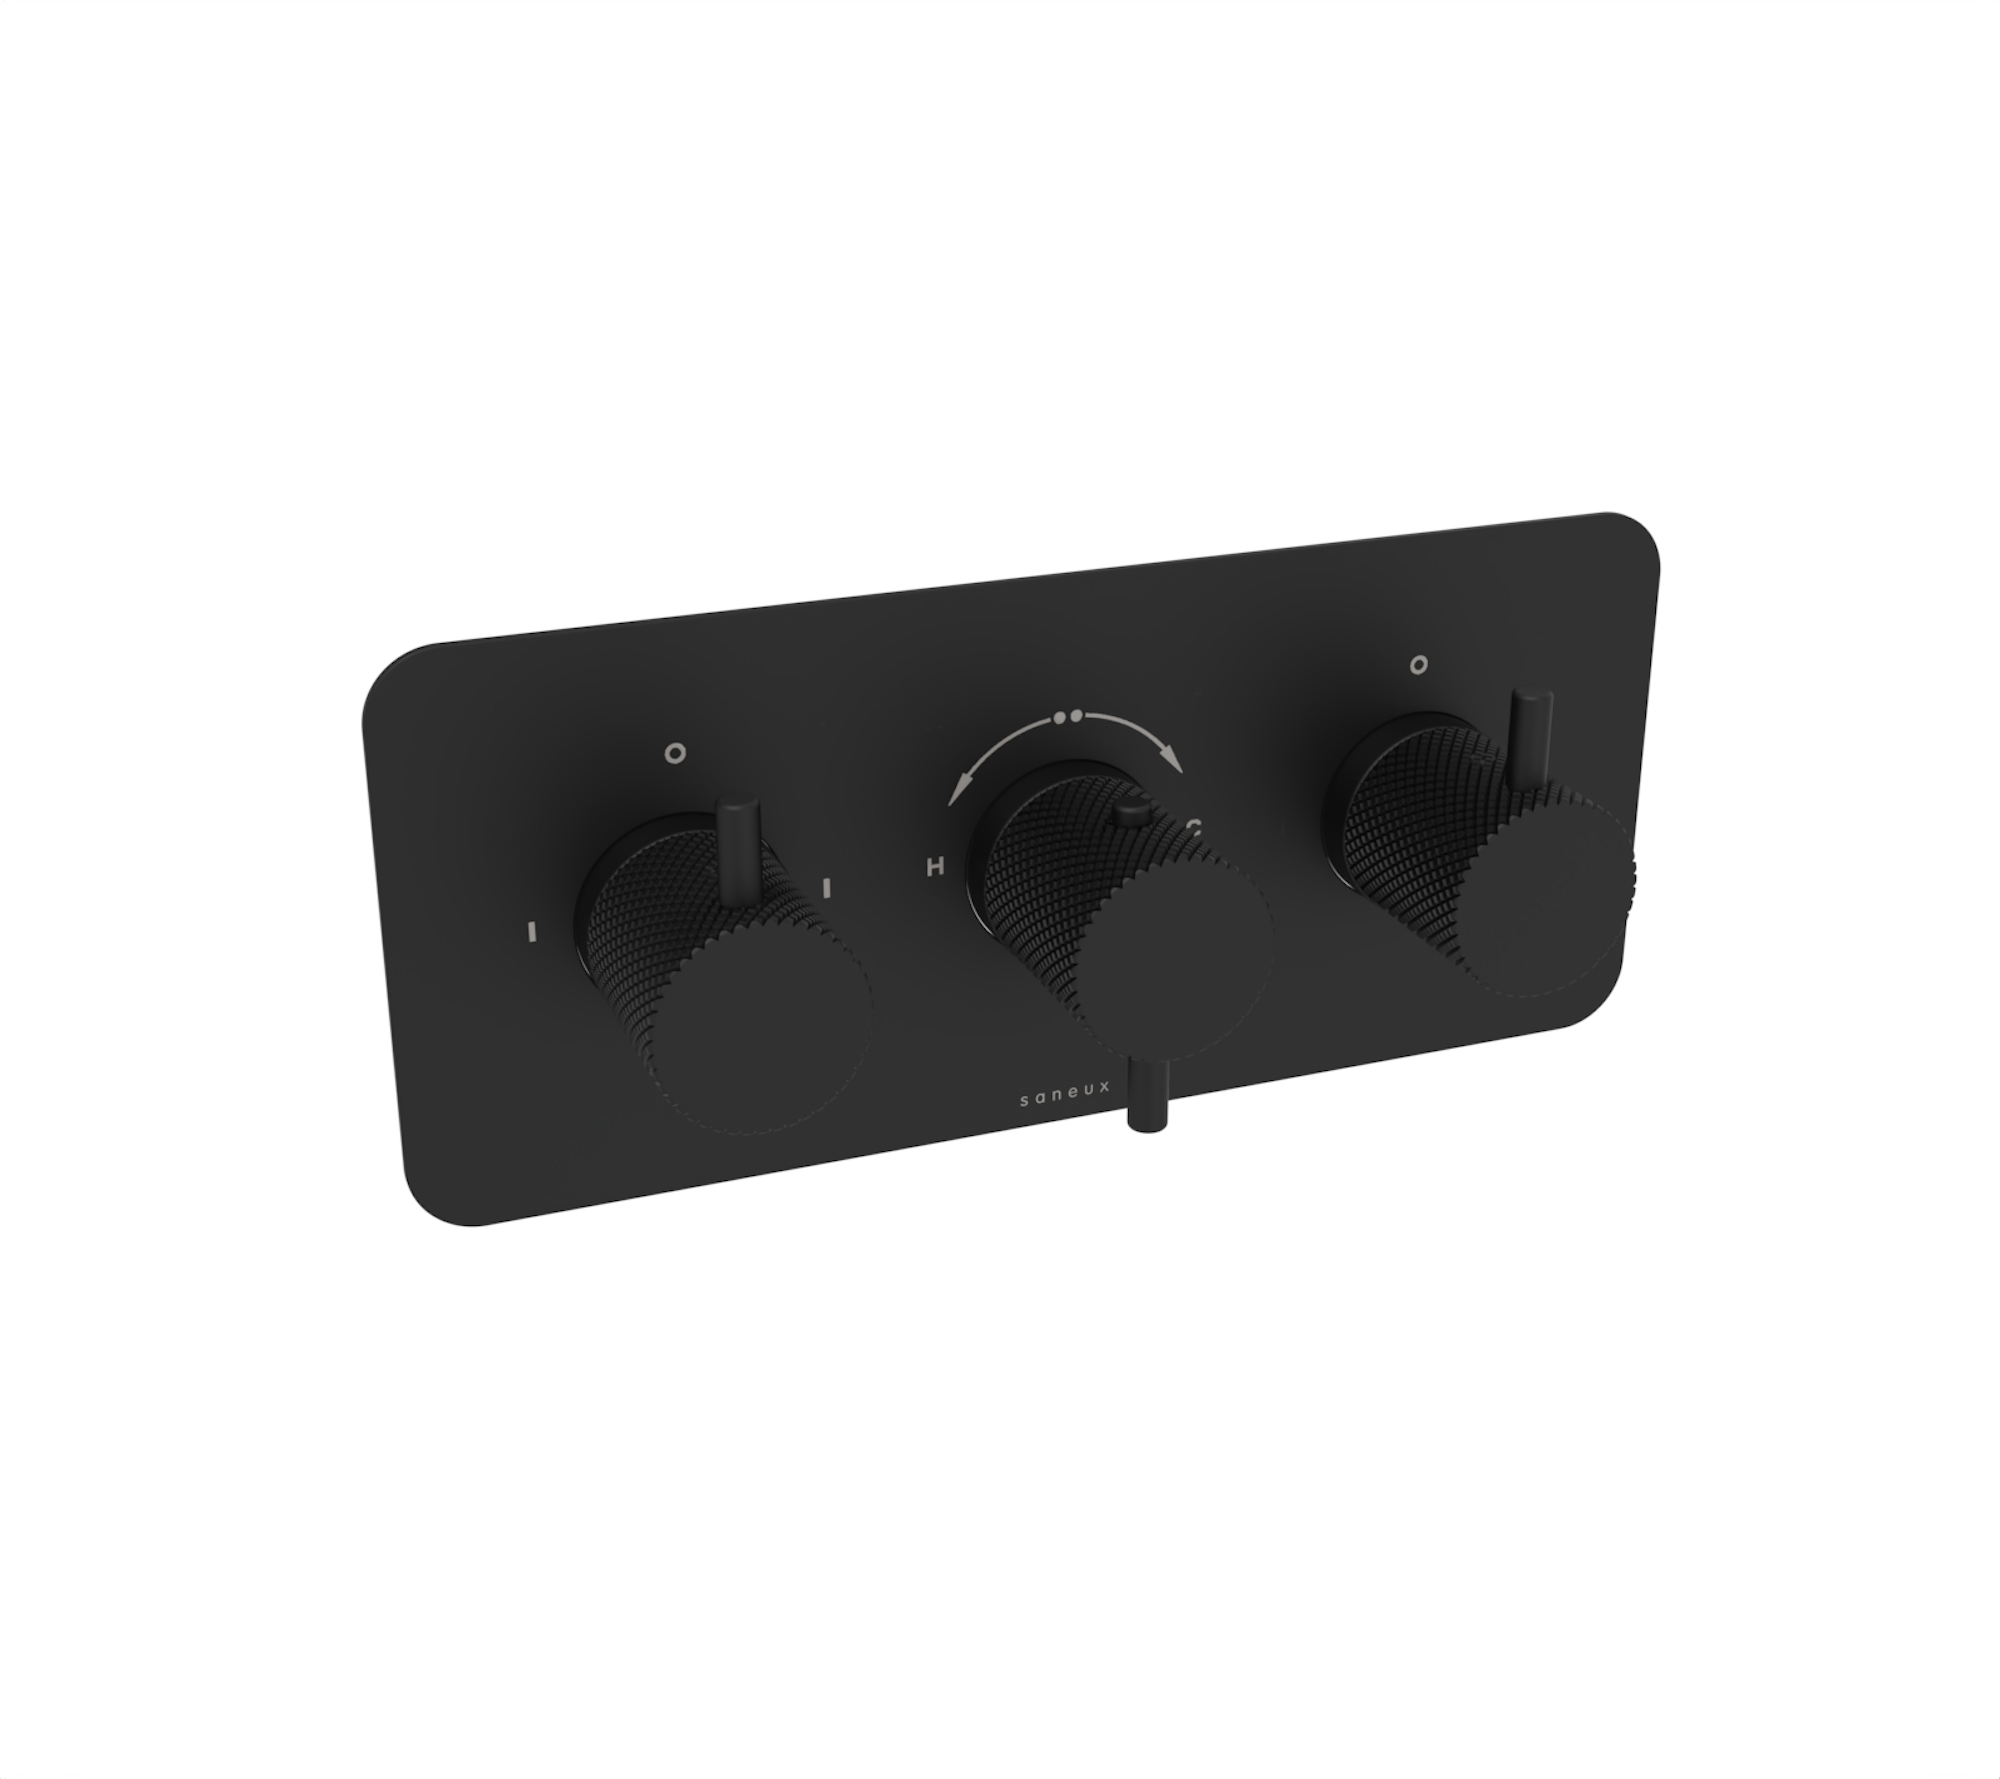 COS 2 way thermostatic low pressure shower valve kit in landscape with knurled handles - Matte Black